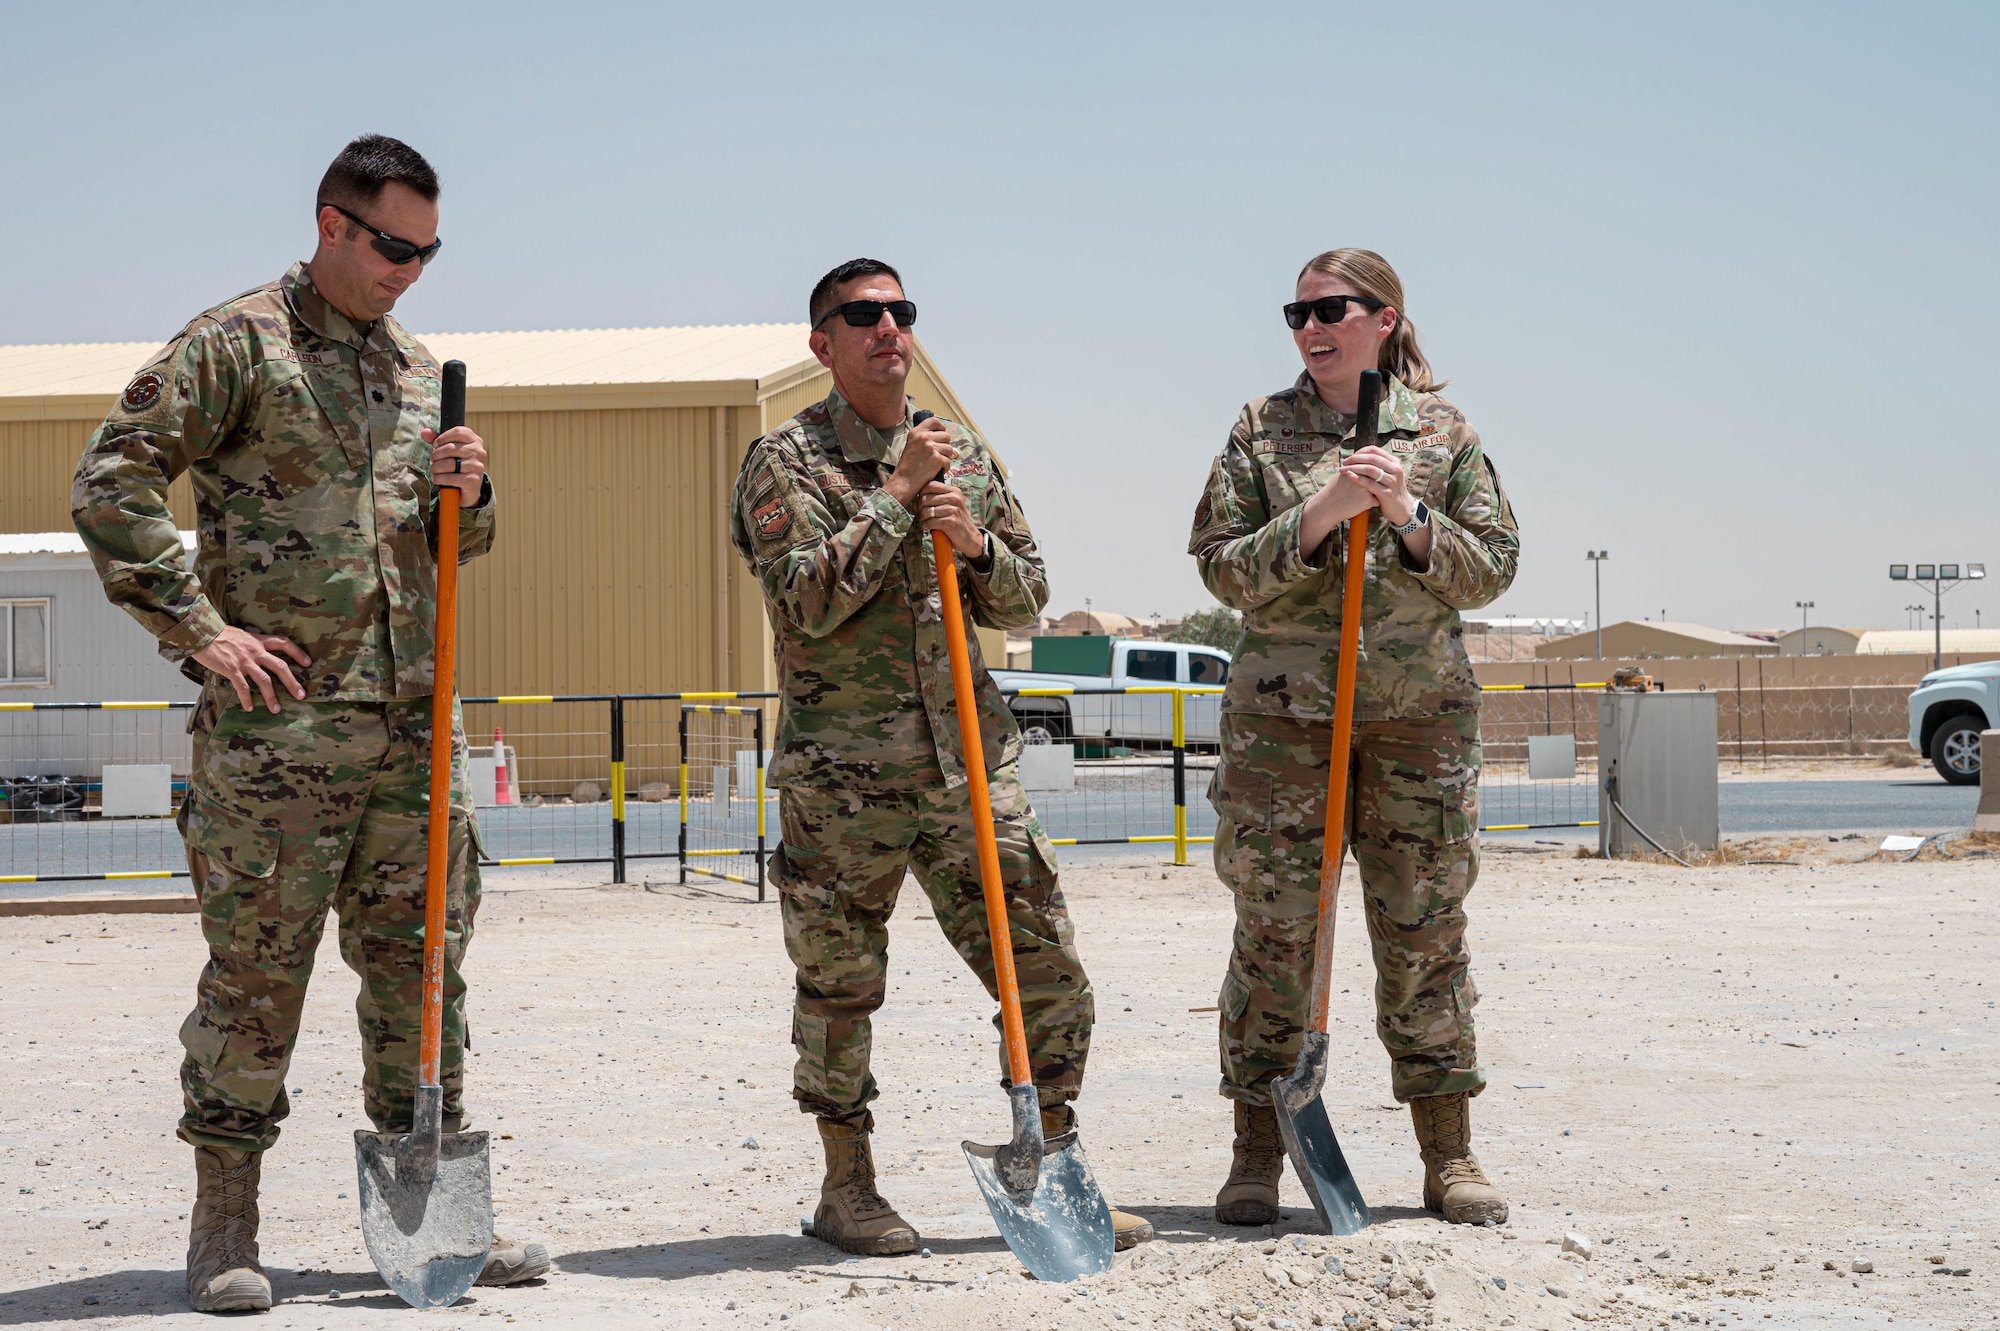 The 386 ELRS held a groundbreaking ceremony for the new aerial port administrative building, leadership gathered to commemorate the first day of construction. The new building will serve multiple functions as it will allow for a centralized location for its previously scattered personnel and a clean slate to allow for innovation at the front end.